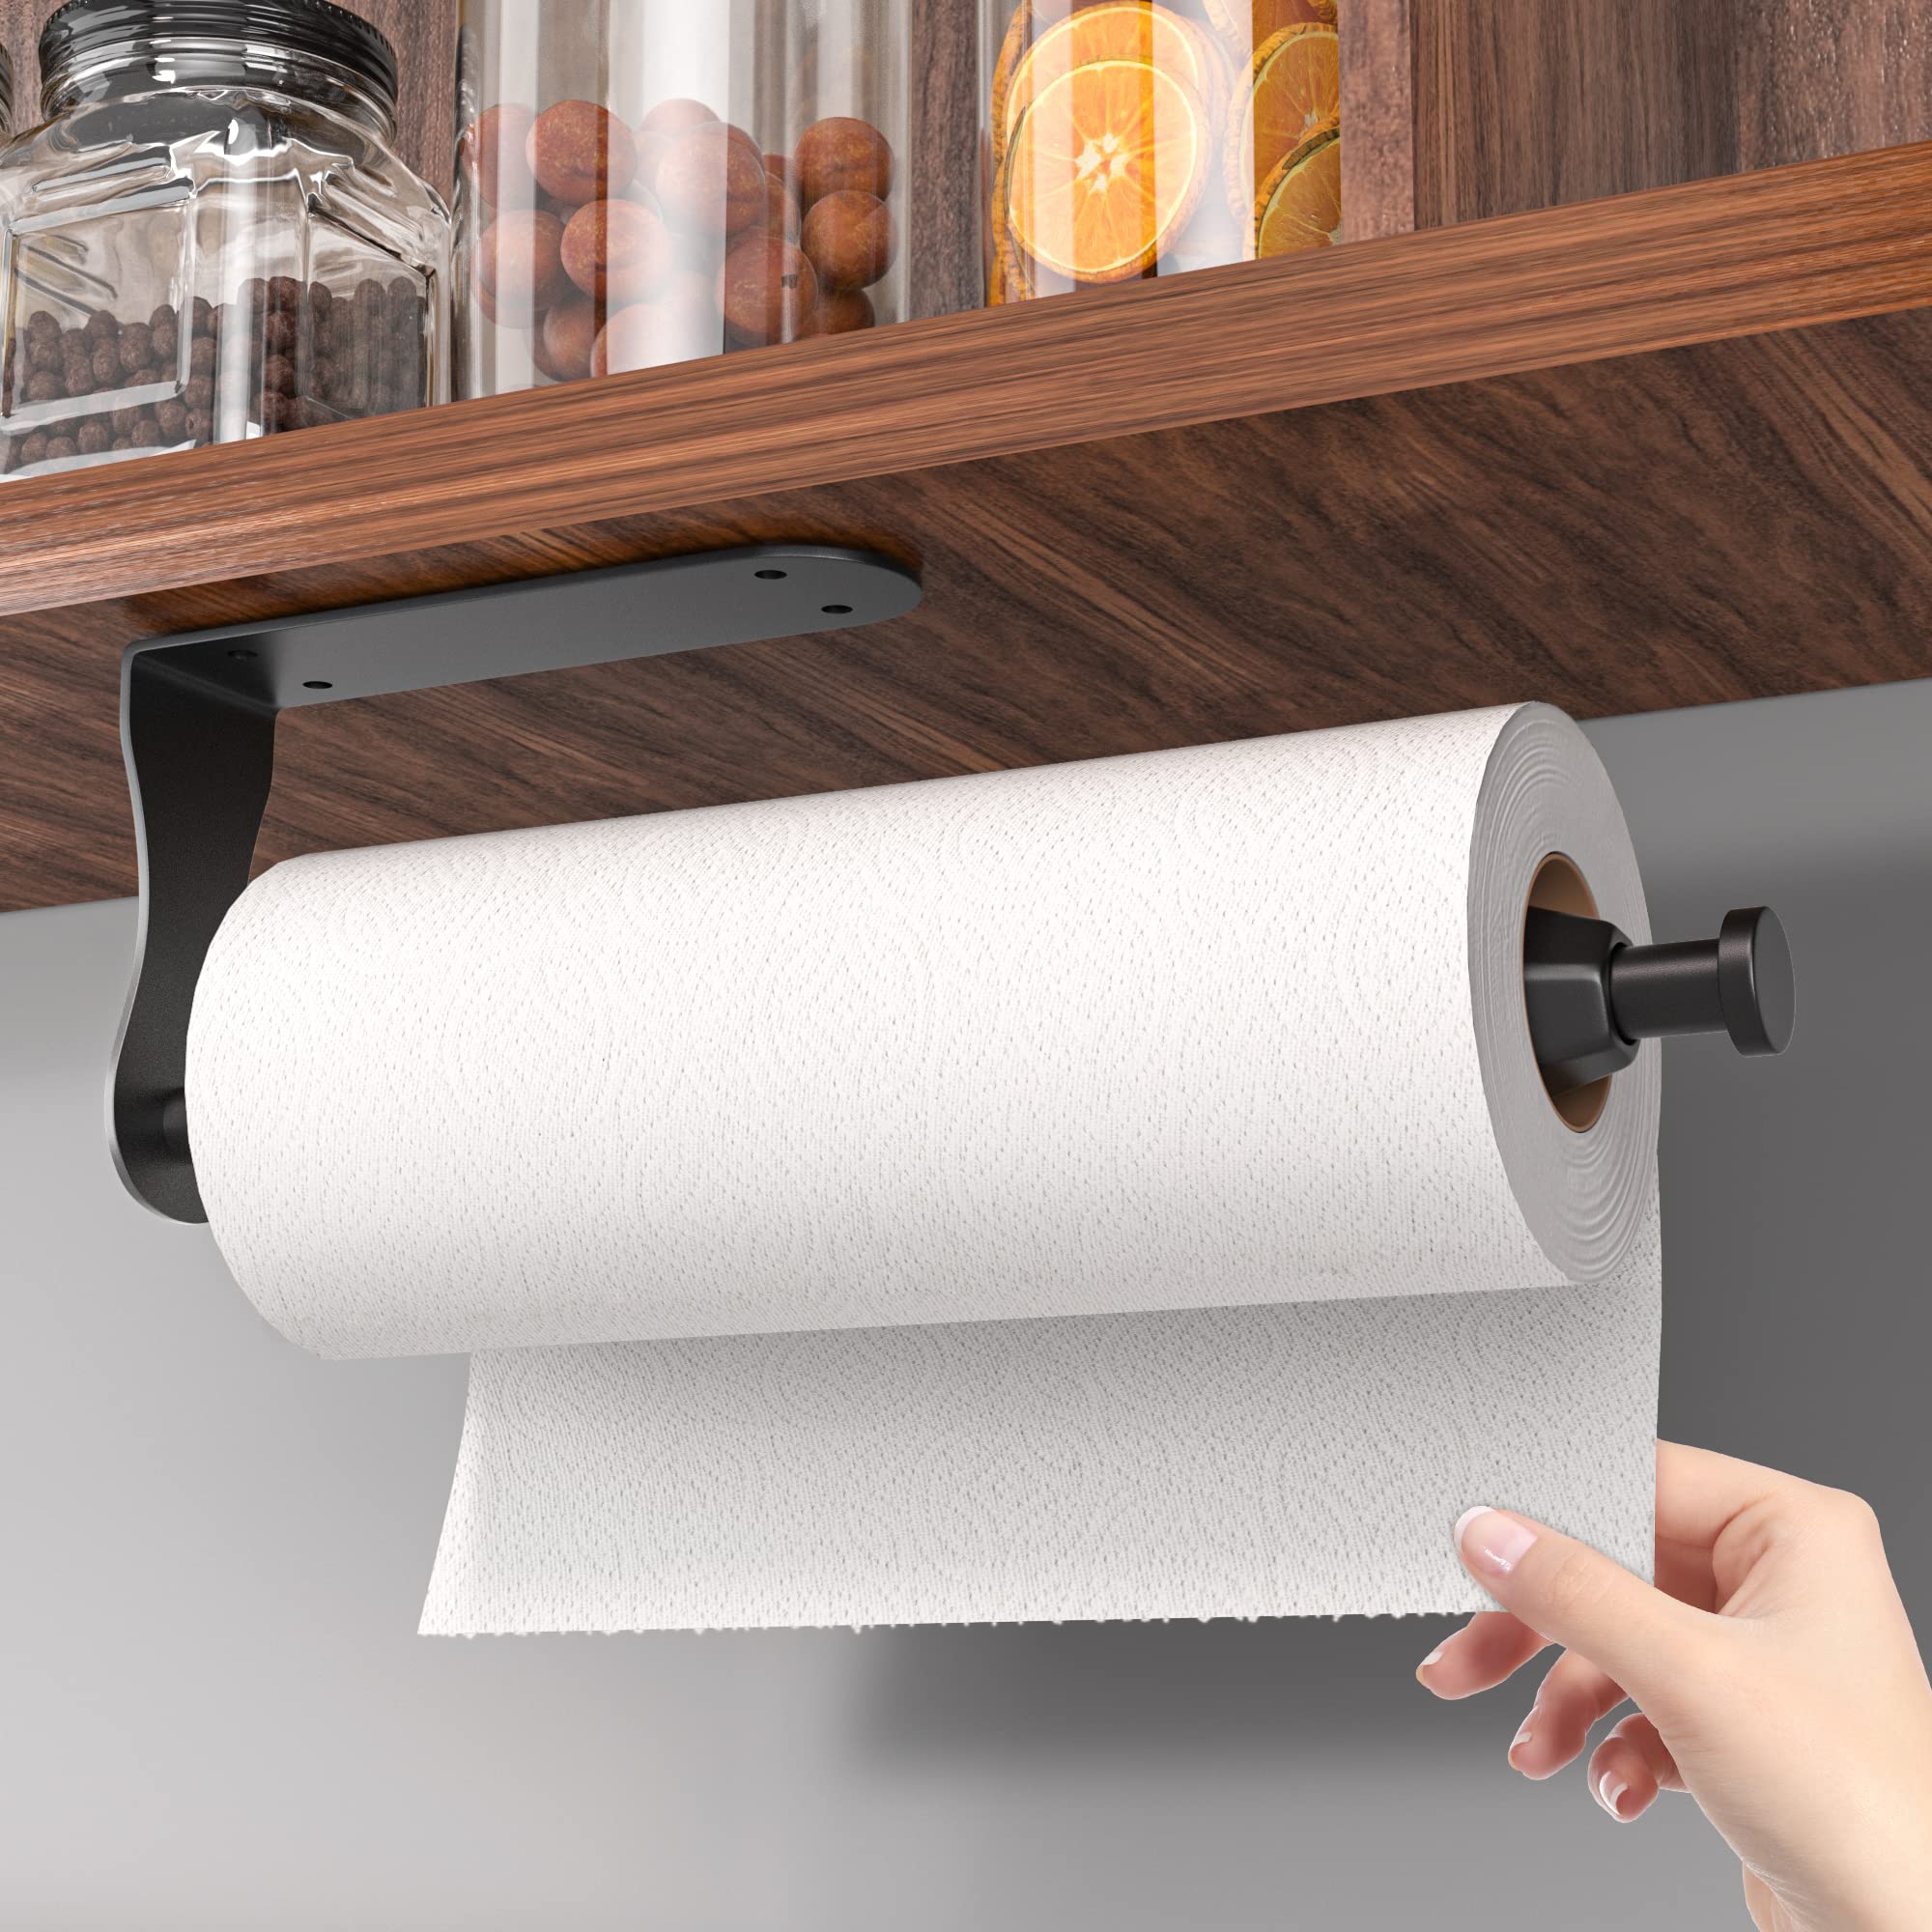 Paper Towel Holder One Hand Operable, Matte Black Kitchen Roll Holder Wall Mounted, Self-Adhensive or Drilling, Anti-Silp Easily Tear Kitchen Paper Holder Under Cabinet